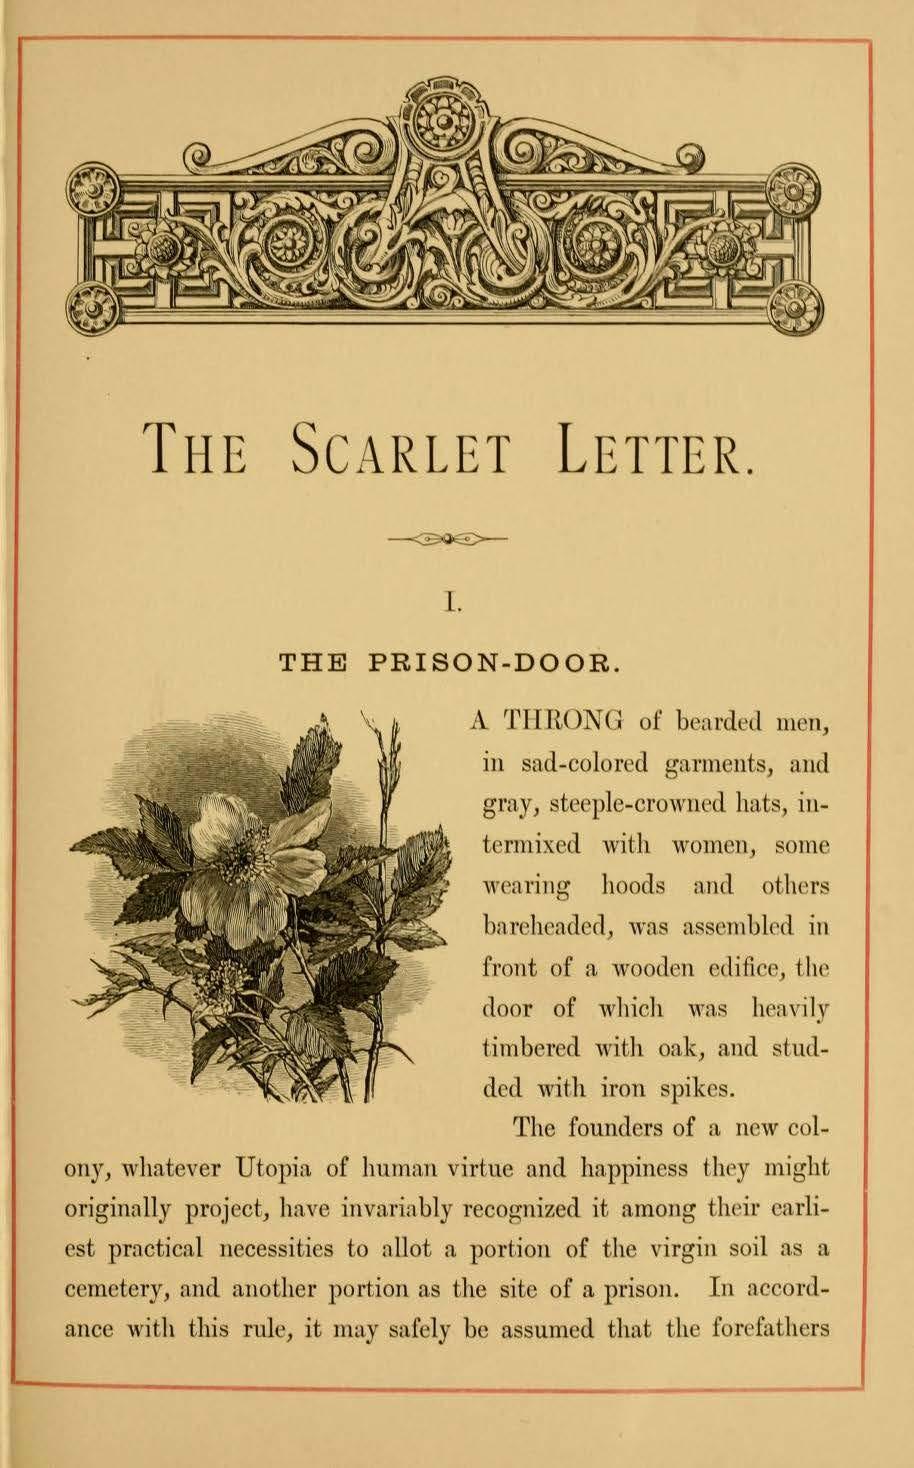 Written by Nathaniel Hawthorne and published in 1850 Considered the first psychological novel and first truly American novel Deals with treatment of